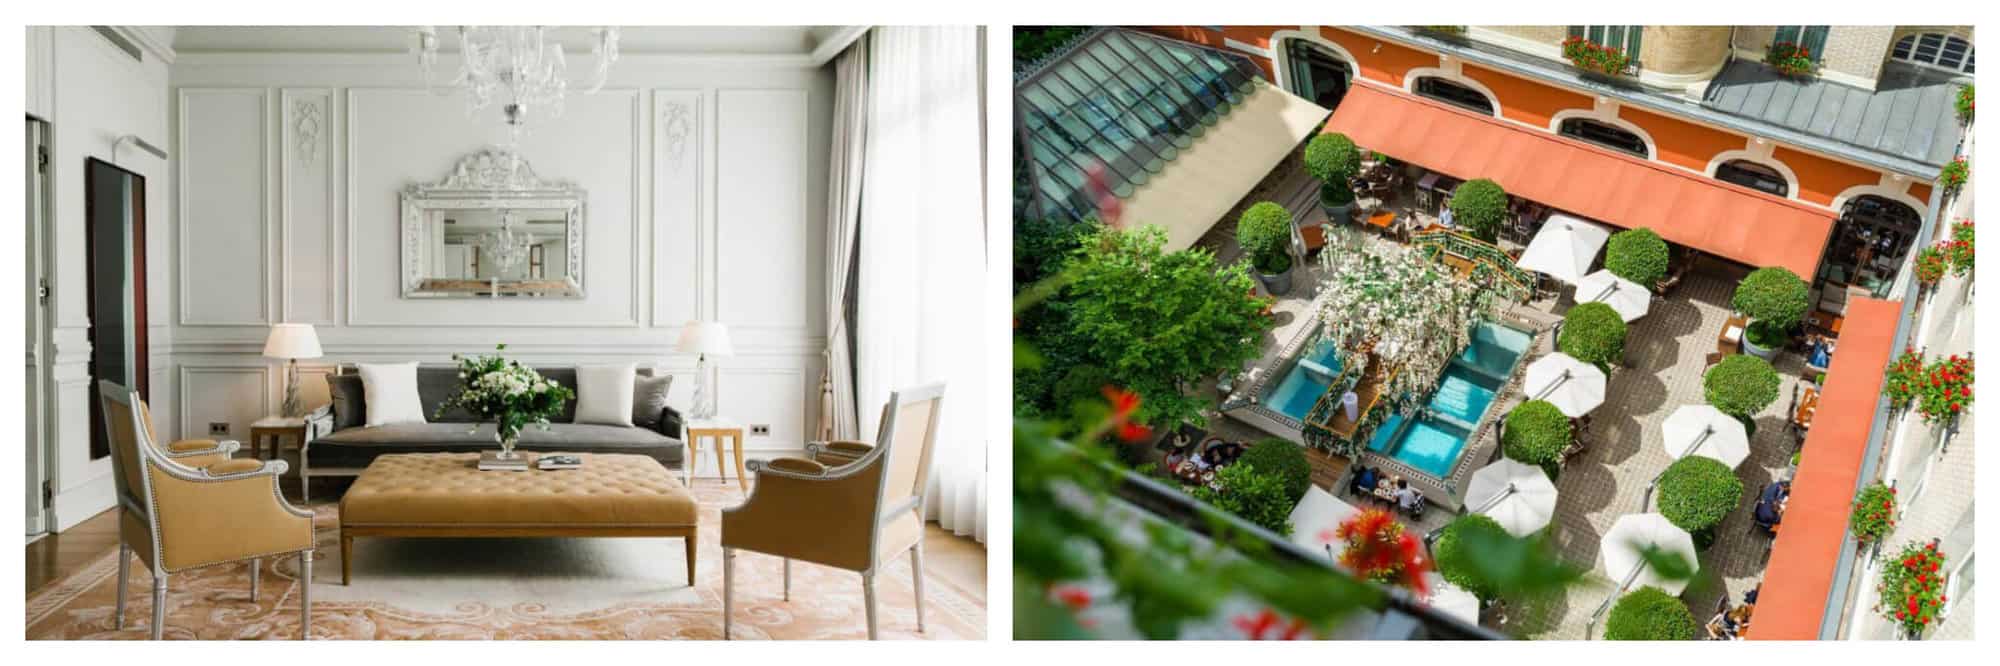 Classical decor in the naturally lit suite at Le Royal Monceau with leather armchairs and long sofa and glass chandelier. An aerial shot of the pool and terrace has green plant pots and white umbrellas with a terracotta awning.